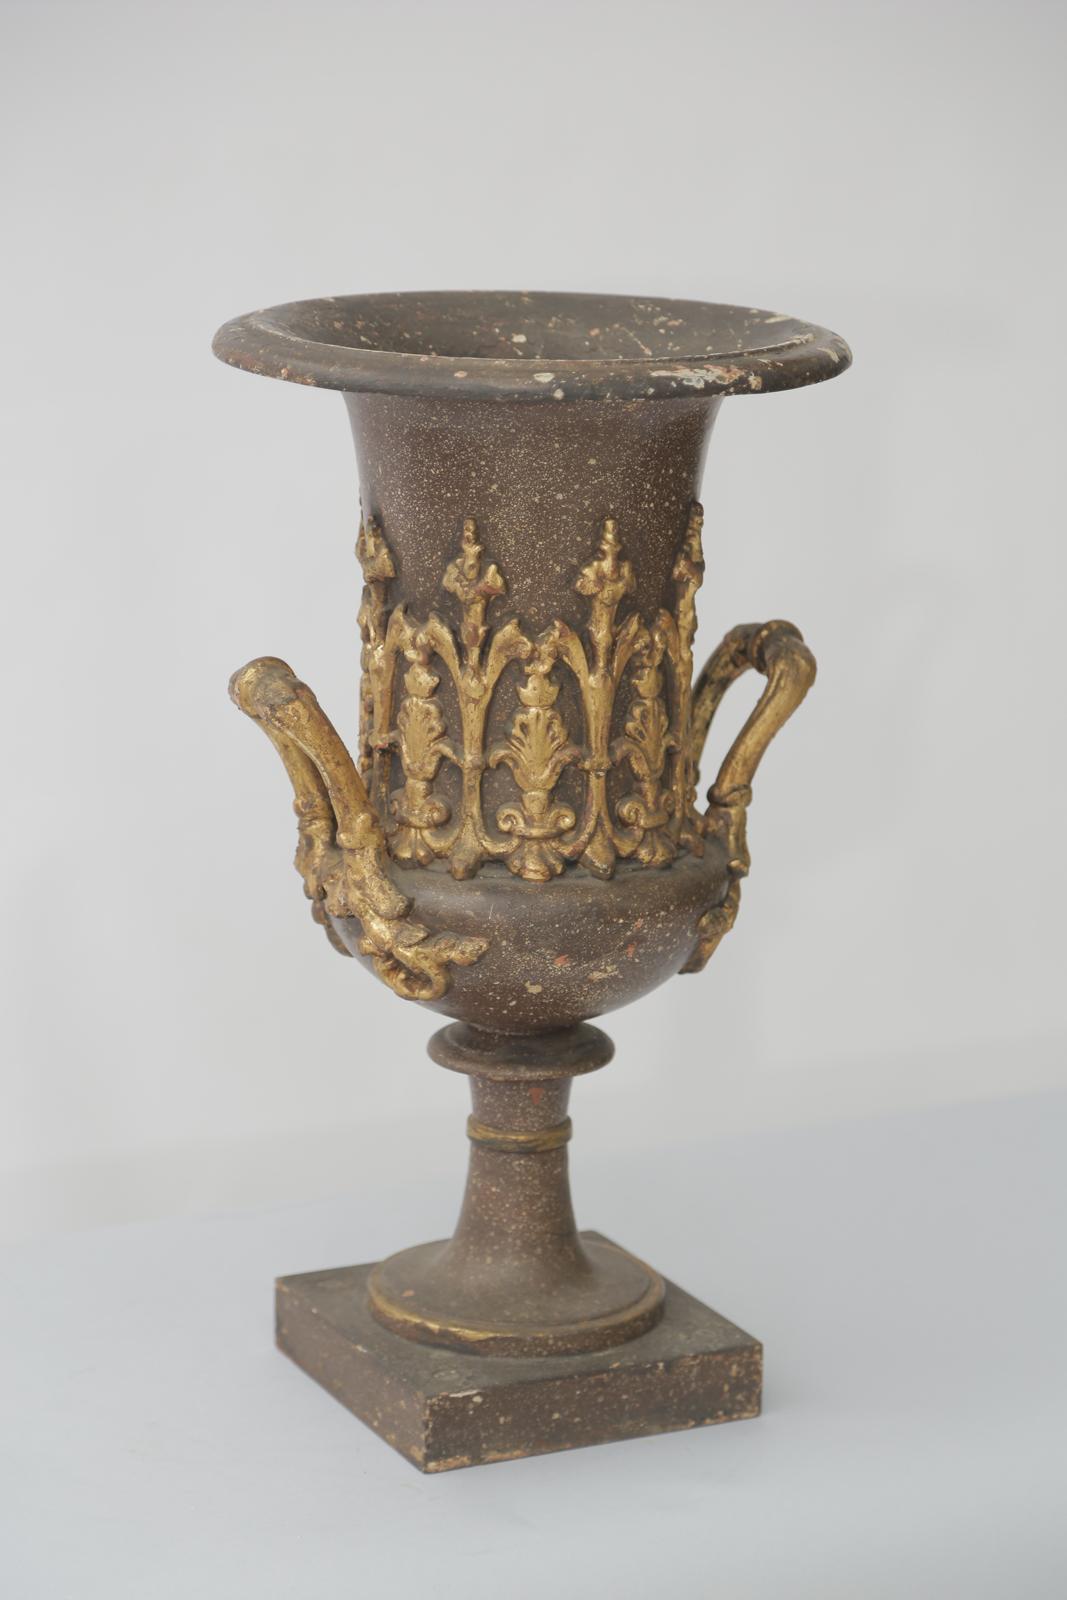 Grand Tour urn, of bronze, with a gilt and patented finish showing natural wear, having a column-snape urn-form; its down-turned bezel over its body, decorated with an anthemion frieze of classical palmettes, raised on an knopped-hourglass neck,